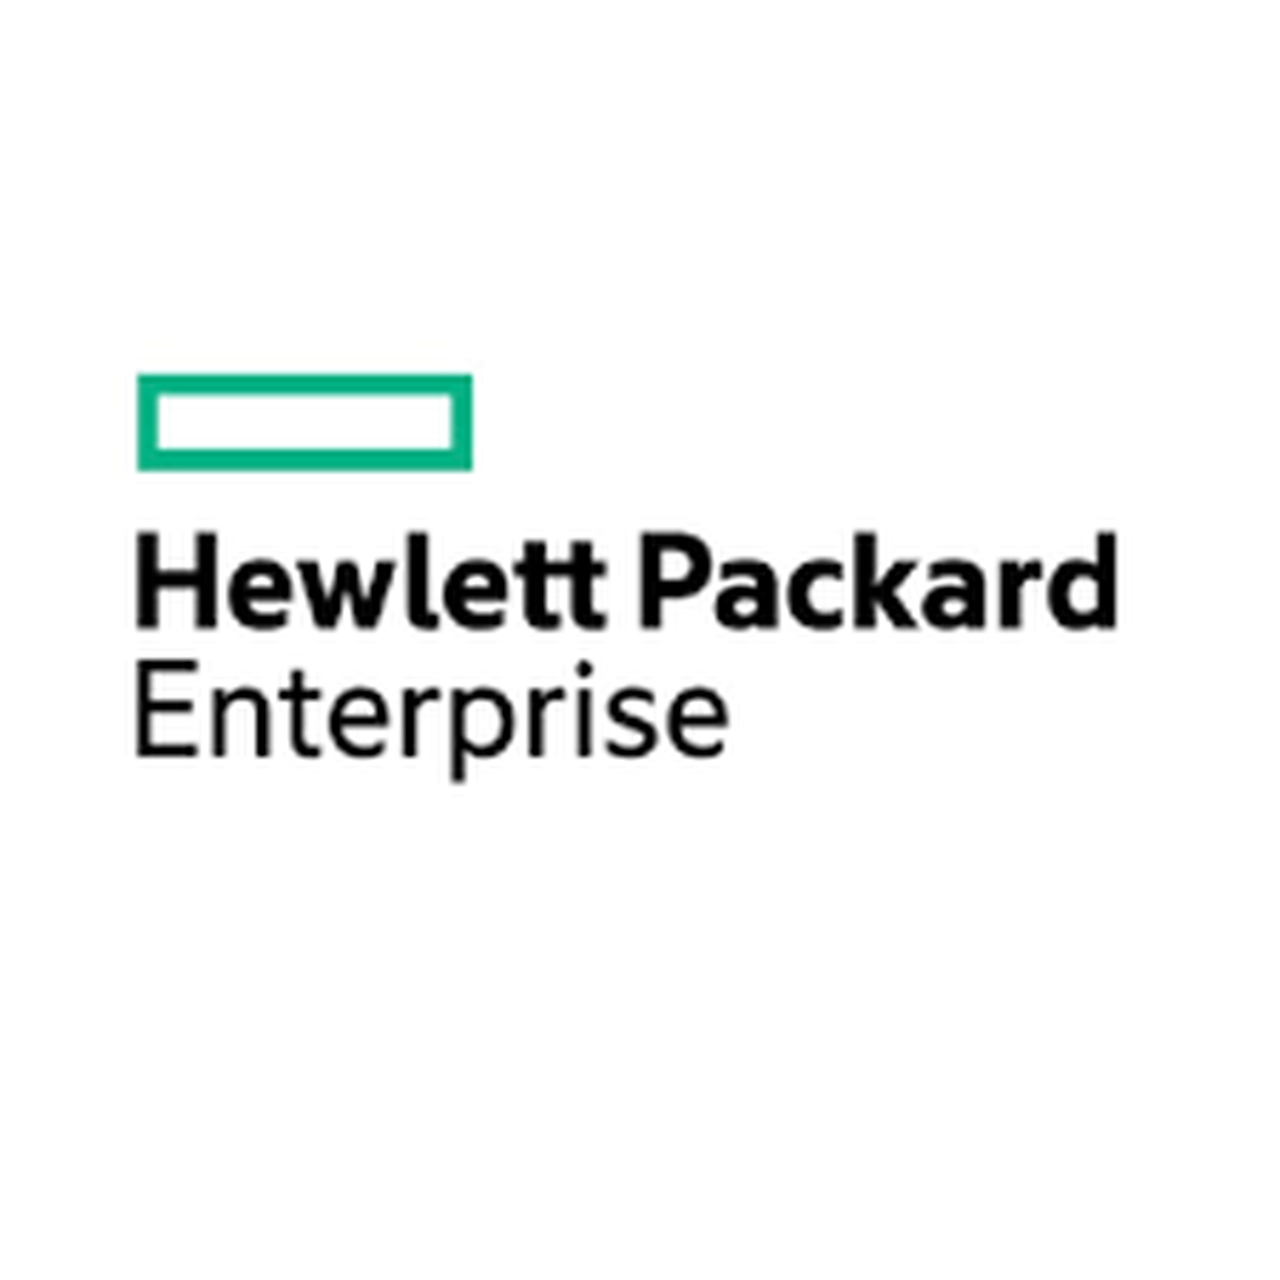 HPE 1 Year Post Warranty Foundation Care, Next Business Day wDMR BL2x220c G7 Service